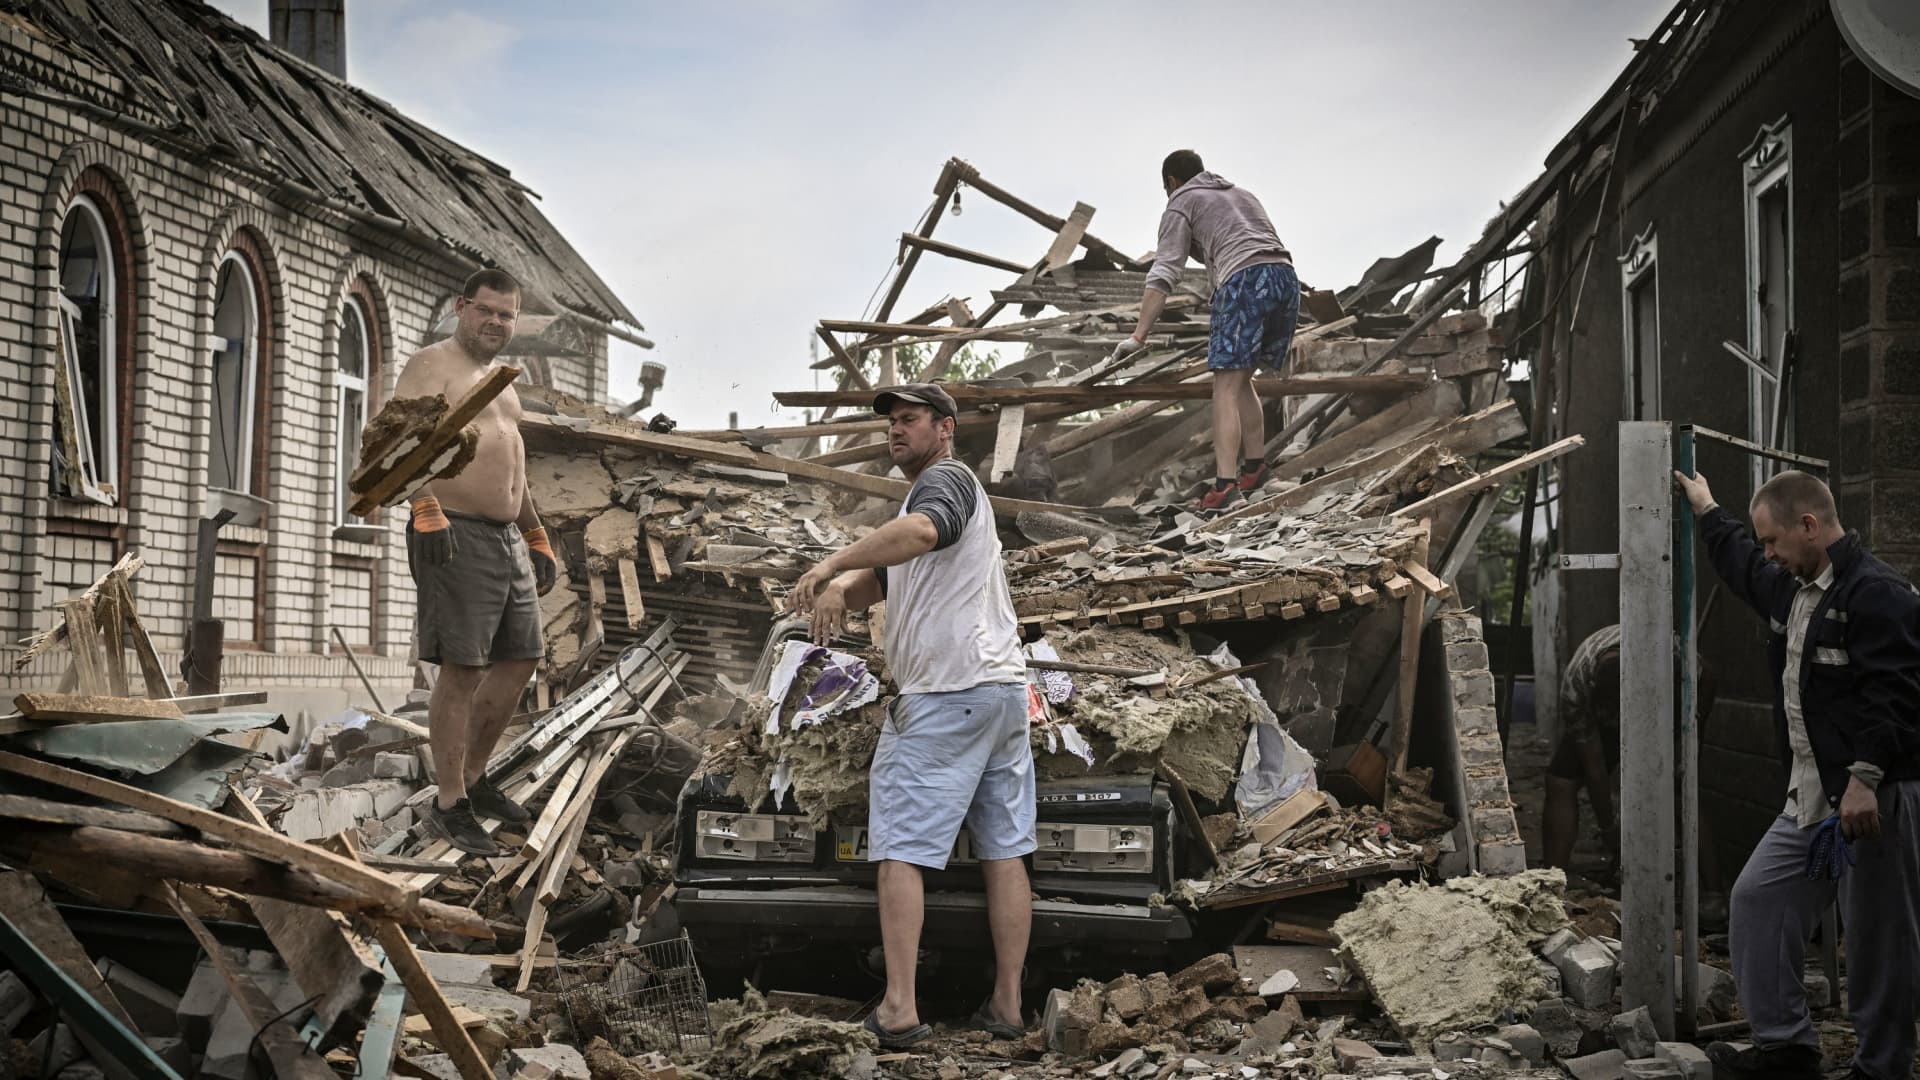 People clean the debris from their destroyed house after a missile strike, which killed an old woman, in the city of Druzhkivka (also written Druzhkovka) in the eastern Ukrainian region of Donbas on June 5, 2022.